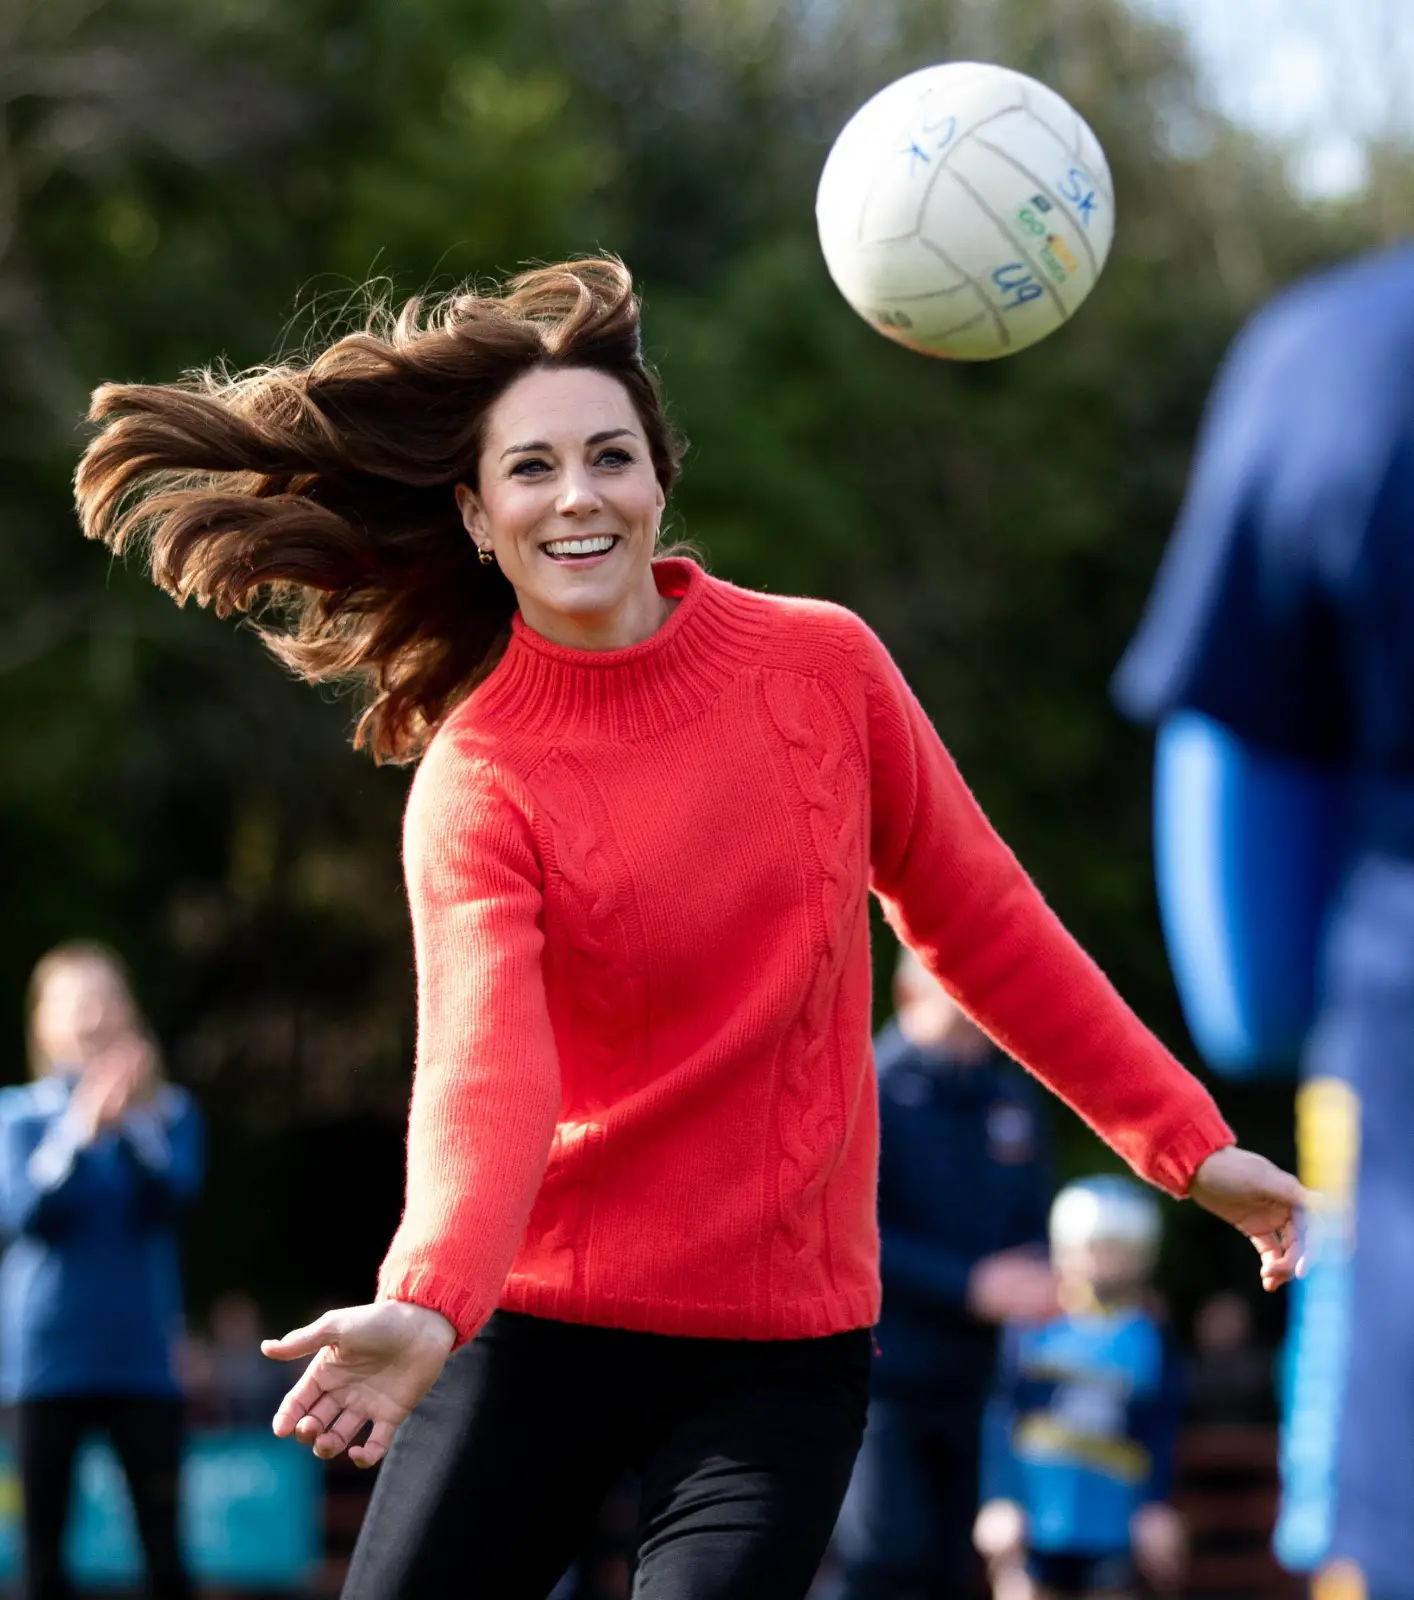 The Duchess of Cambridge playing with children during the last day of Ireland Tour